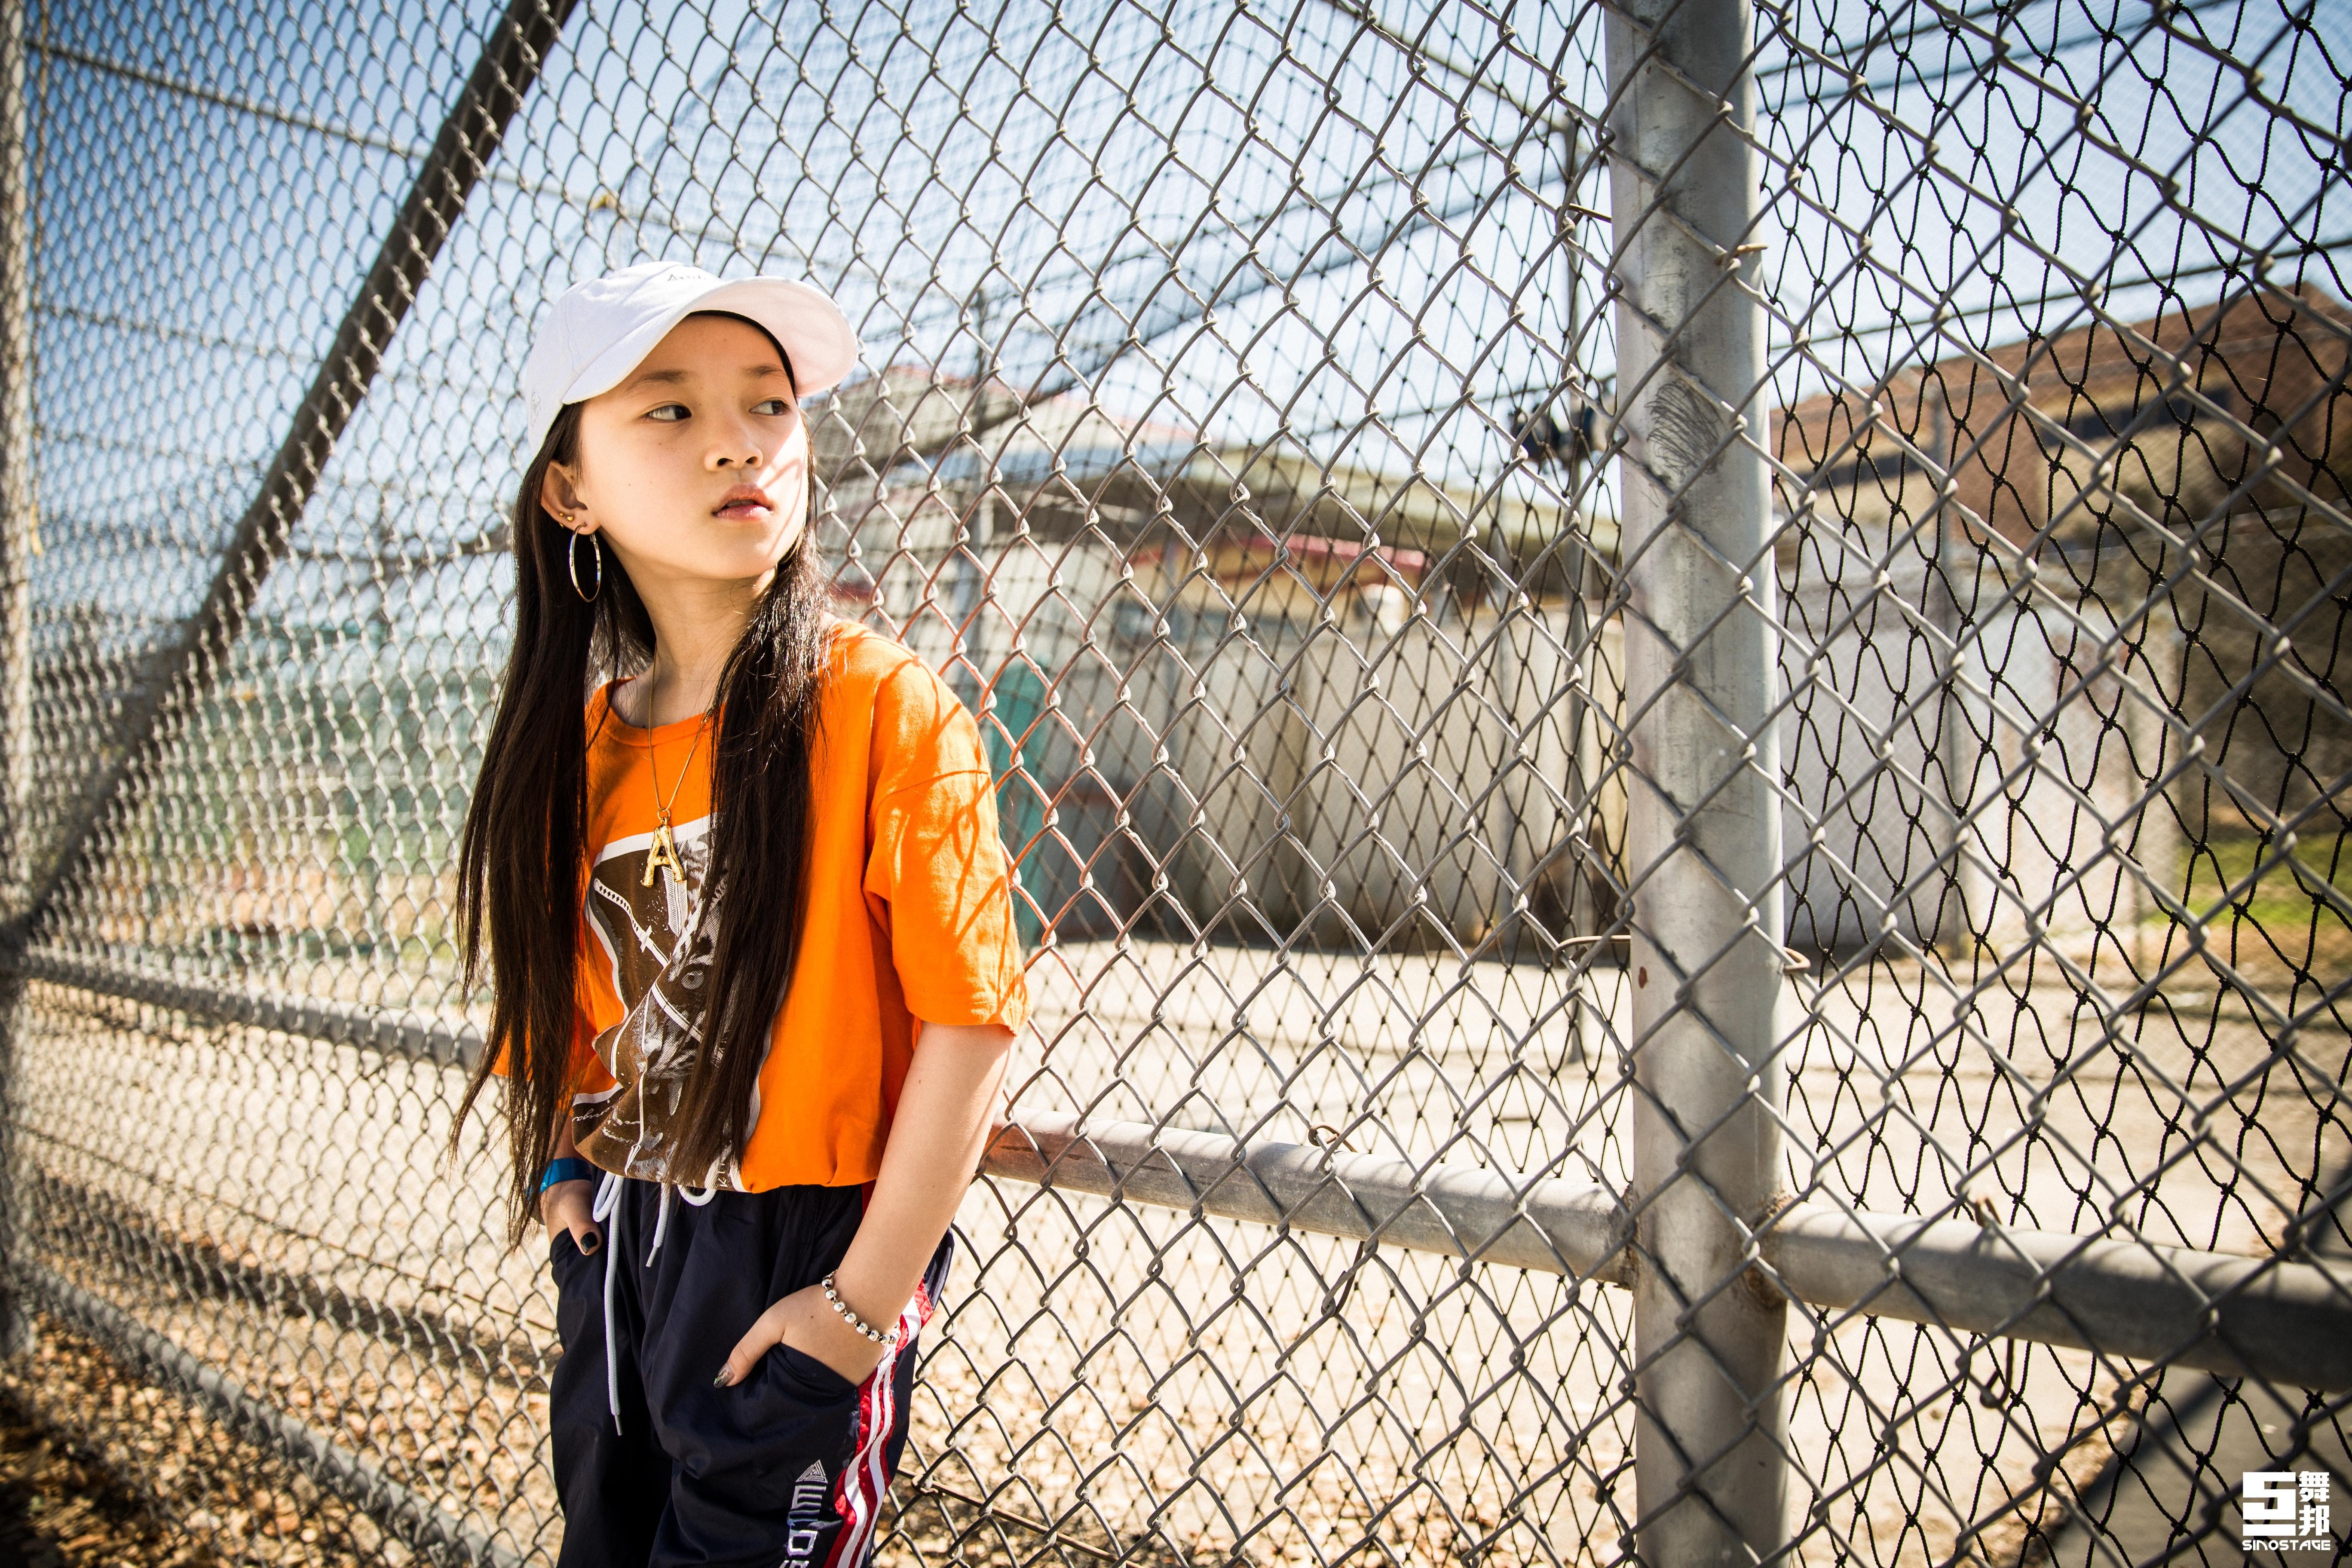 Amy Zhu, a 10-year-old hip-hop dancer from Chengdu, seems unaffected by the controversy around her, saying she just wants to study hard at school and practise dance.